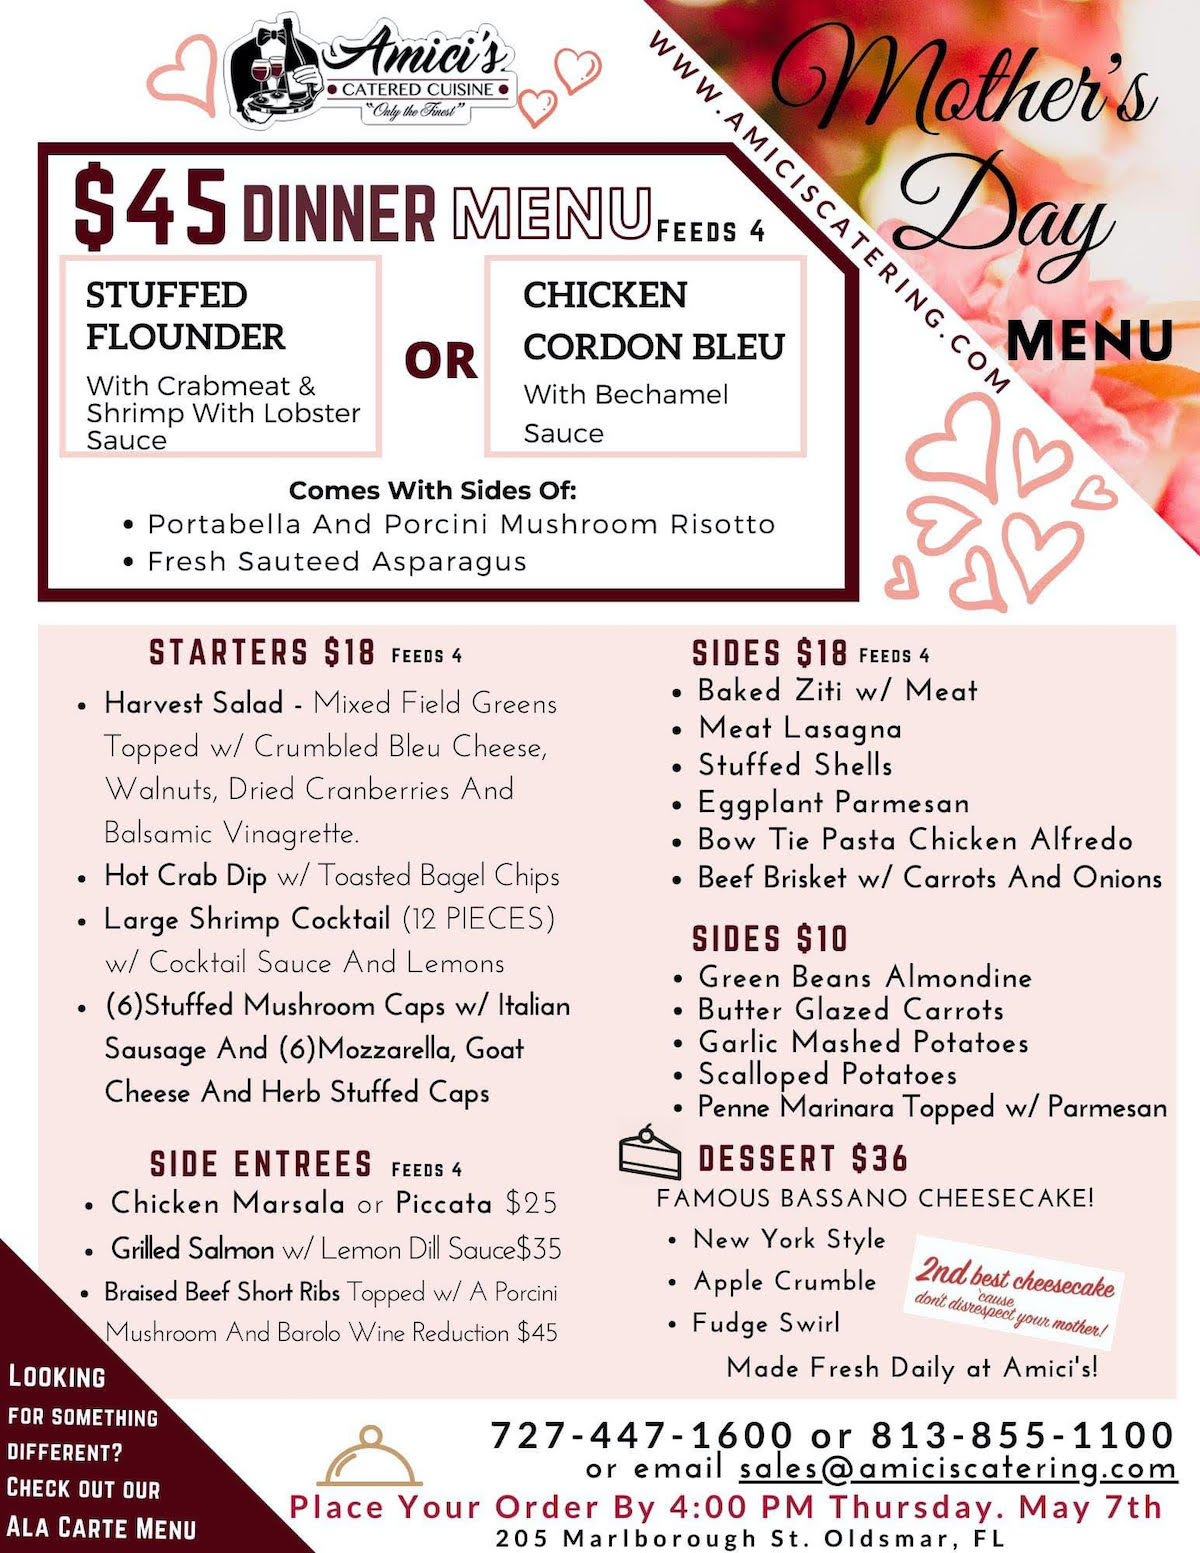 Amici's Catered Cuisine Mothers Day 2020 Menu